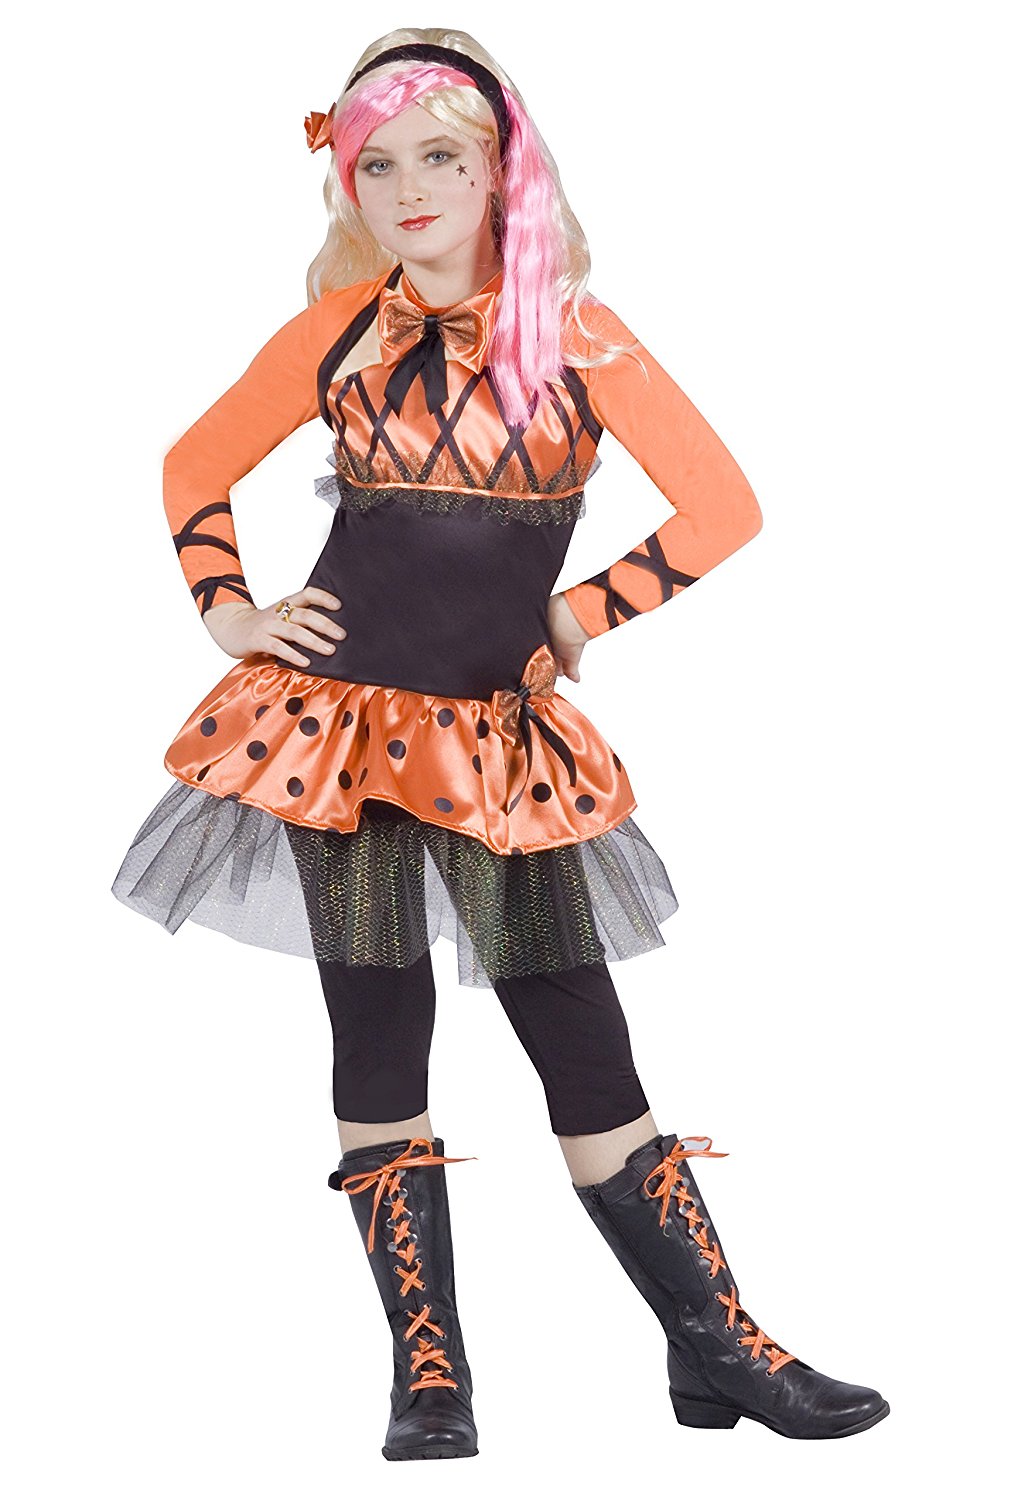 Are you ready for Halloween in Winx Style?